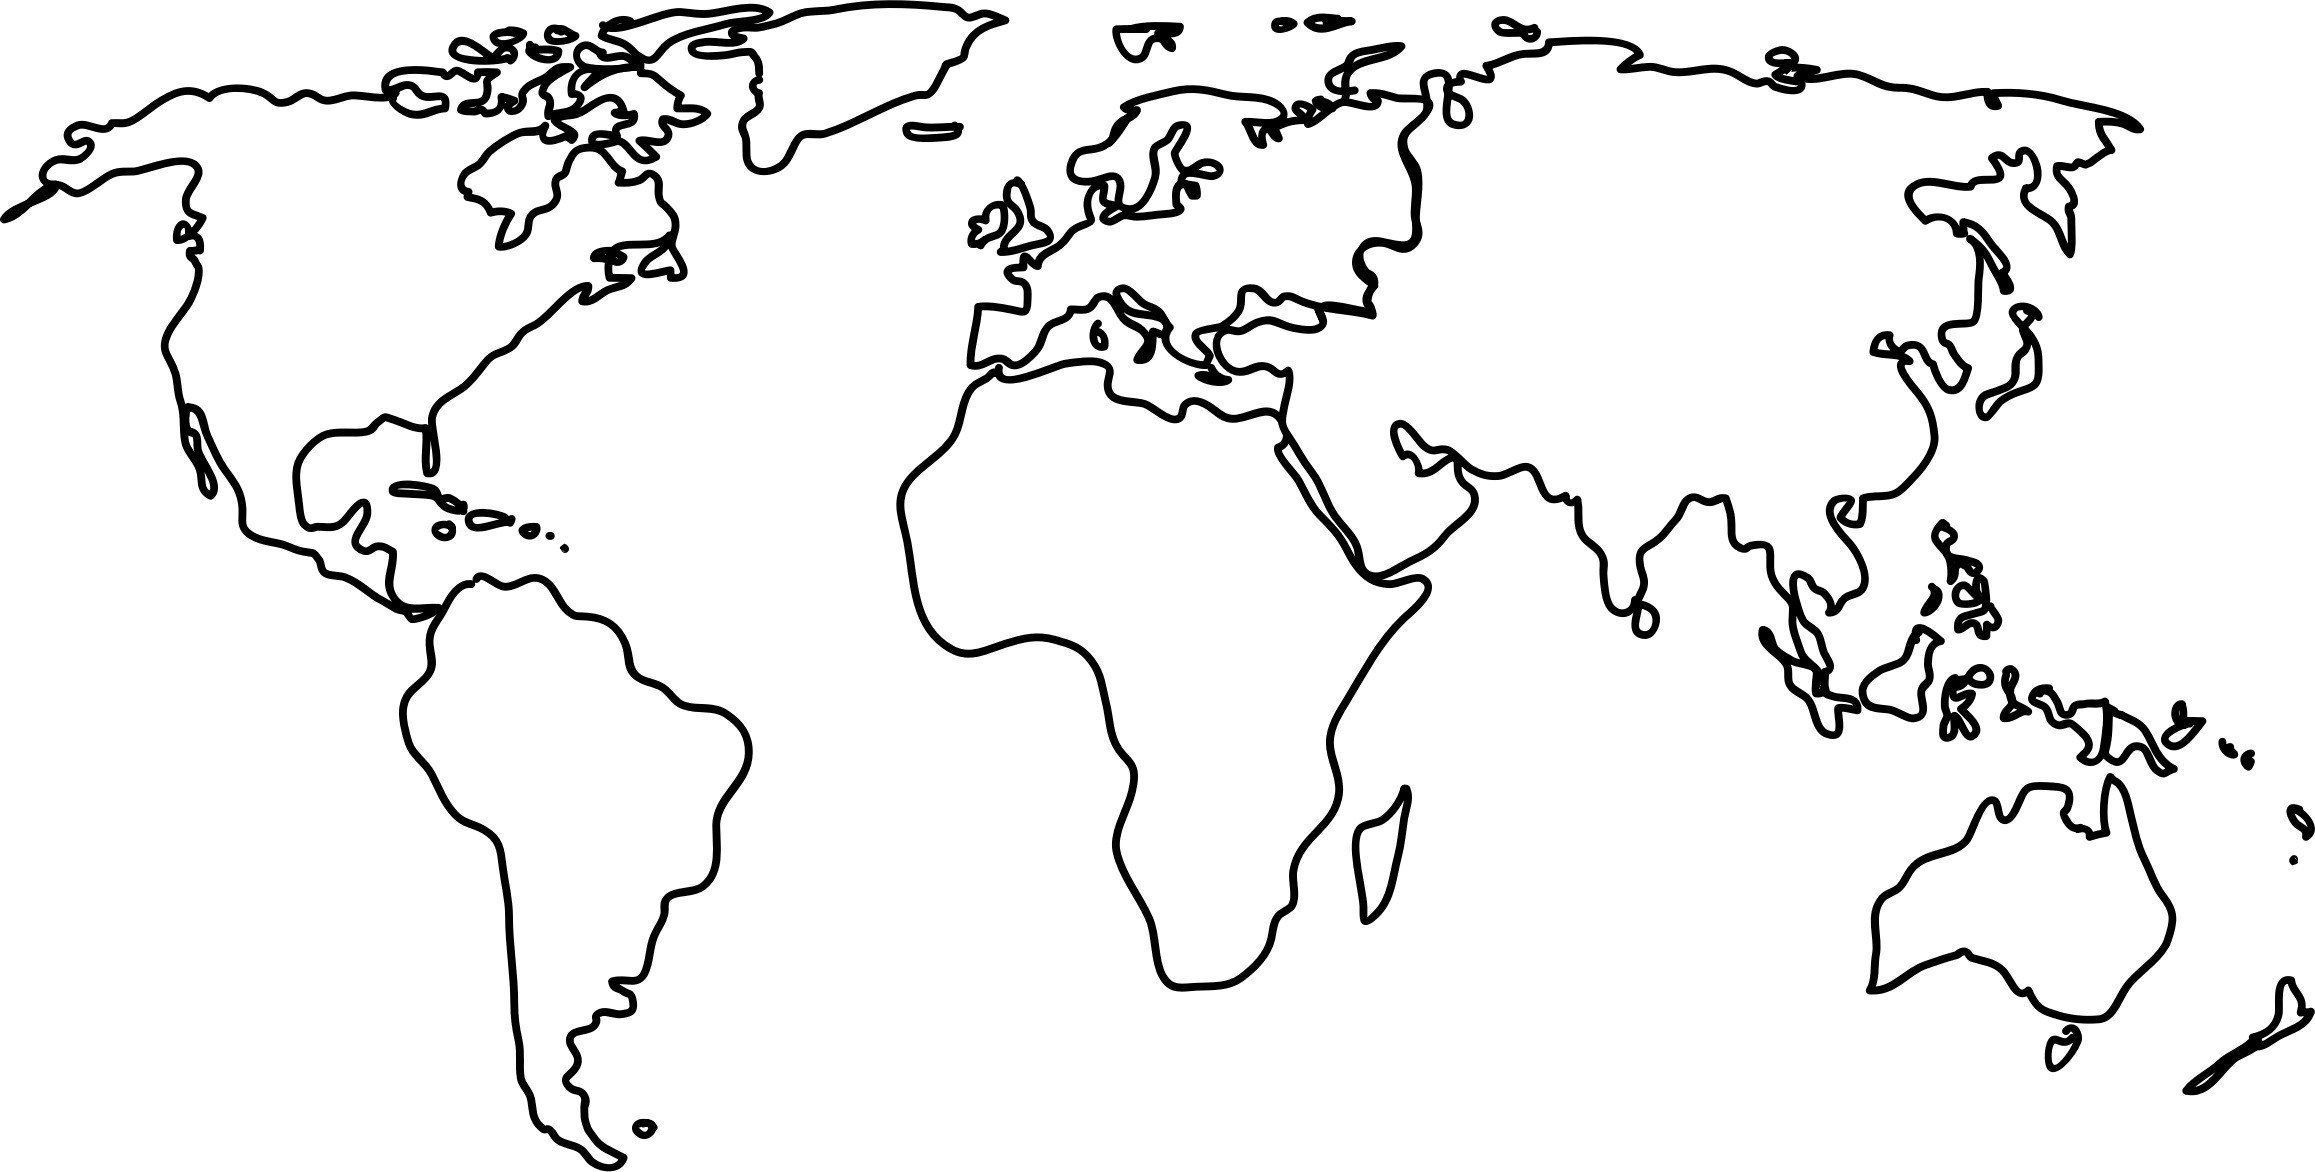 world map country outlines